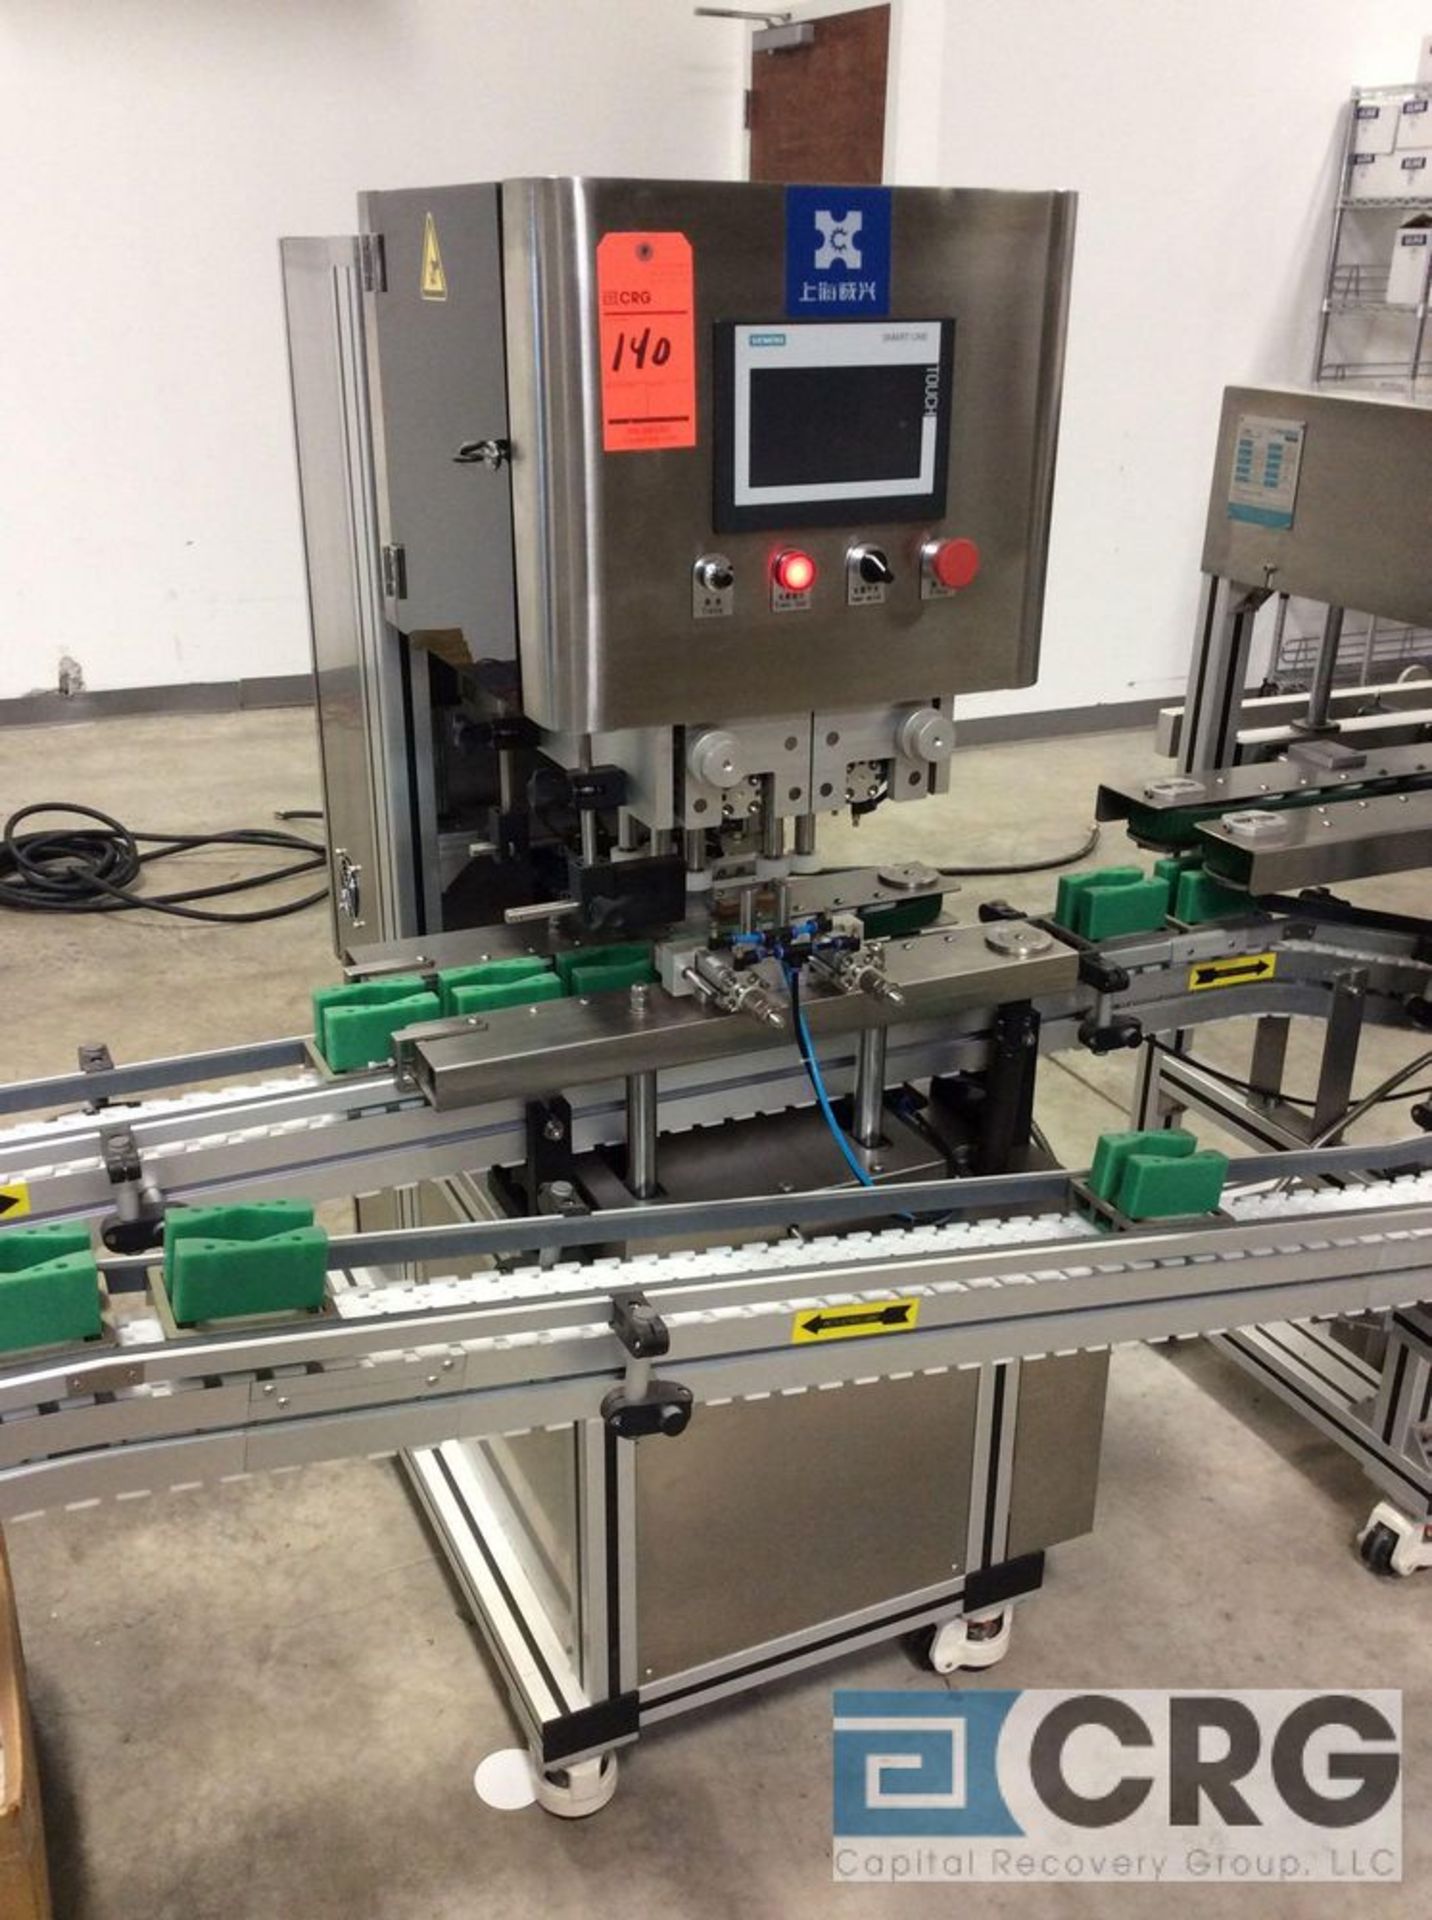 NEW 2018 Chasing XAV8-AT capping machine, Siemens Smart Line touch screen controls, 220 volt, 1 - Image 2 of 5